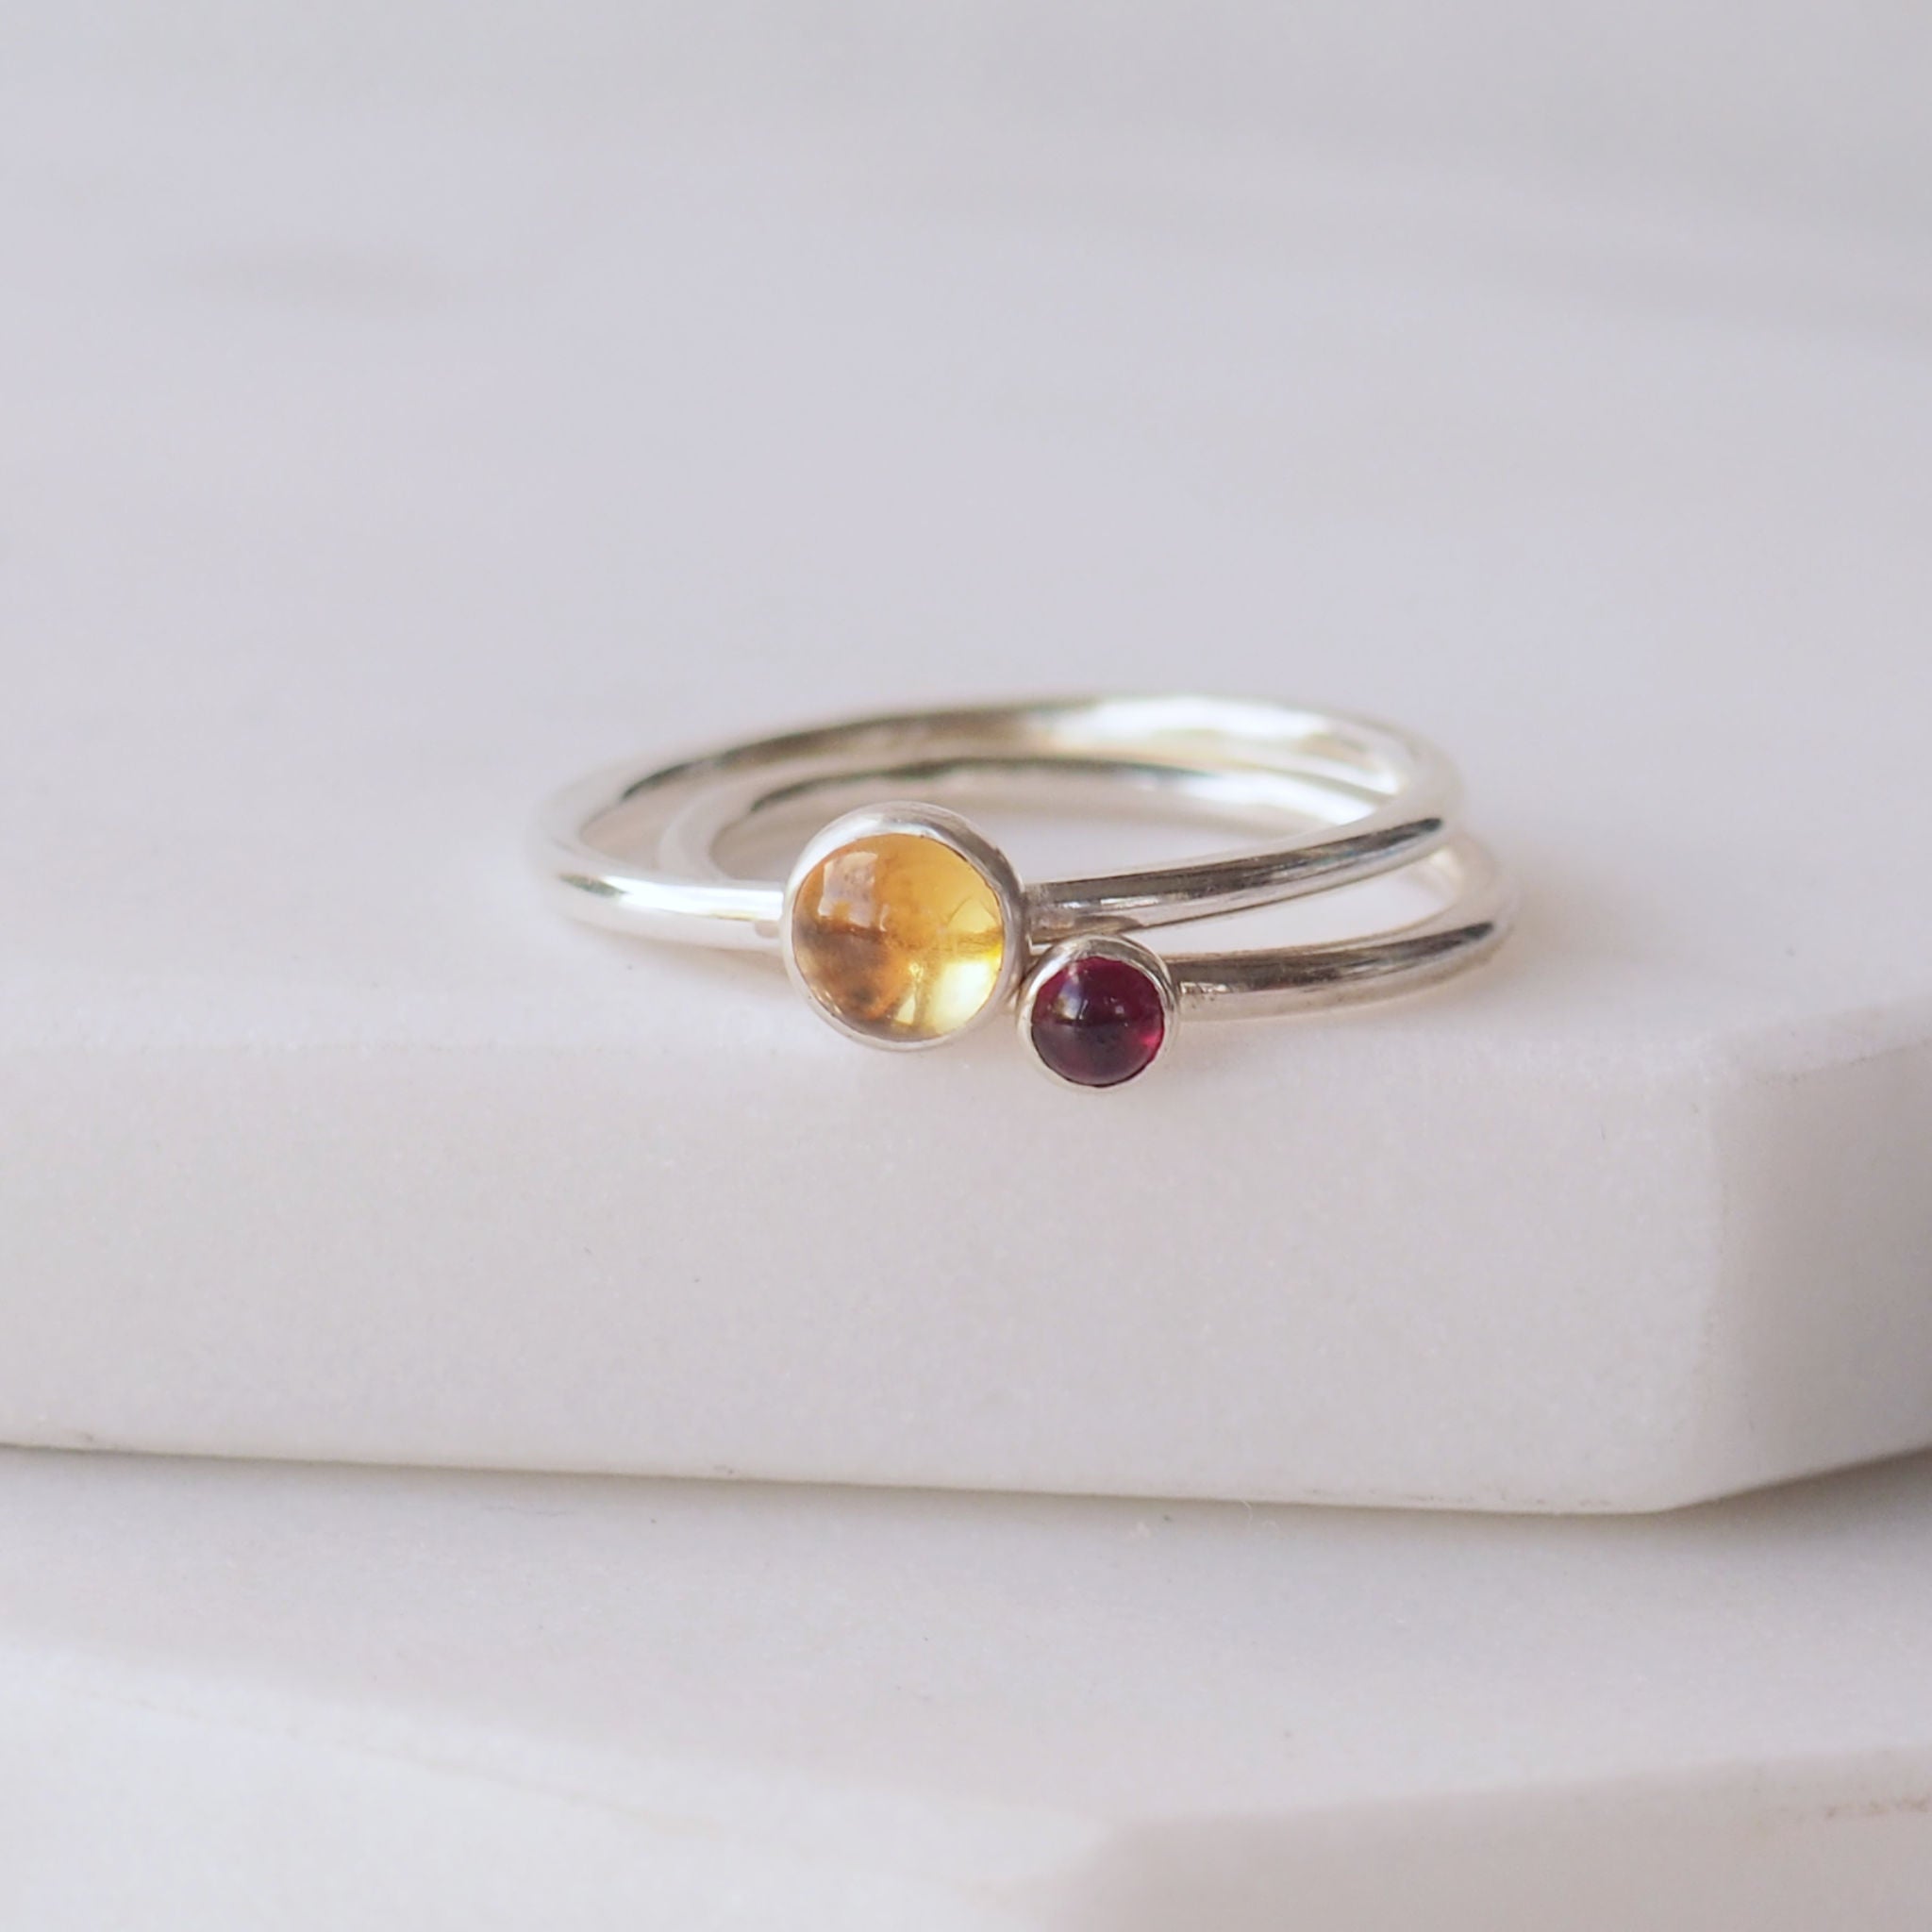 Two silver rings with Yellow Citrine and Garnet round gemstones. Birthstones for November and January. Handmade to your ring size by maram jewellery in Scotland , UK